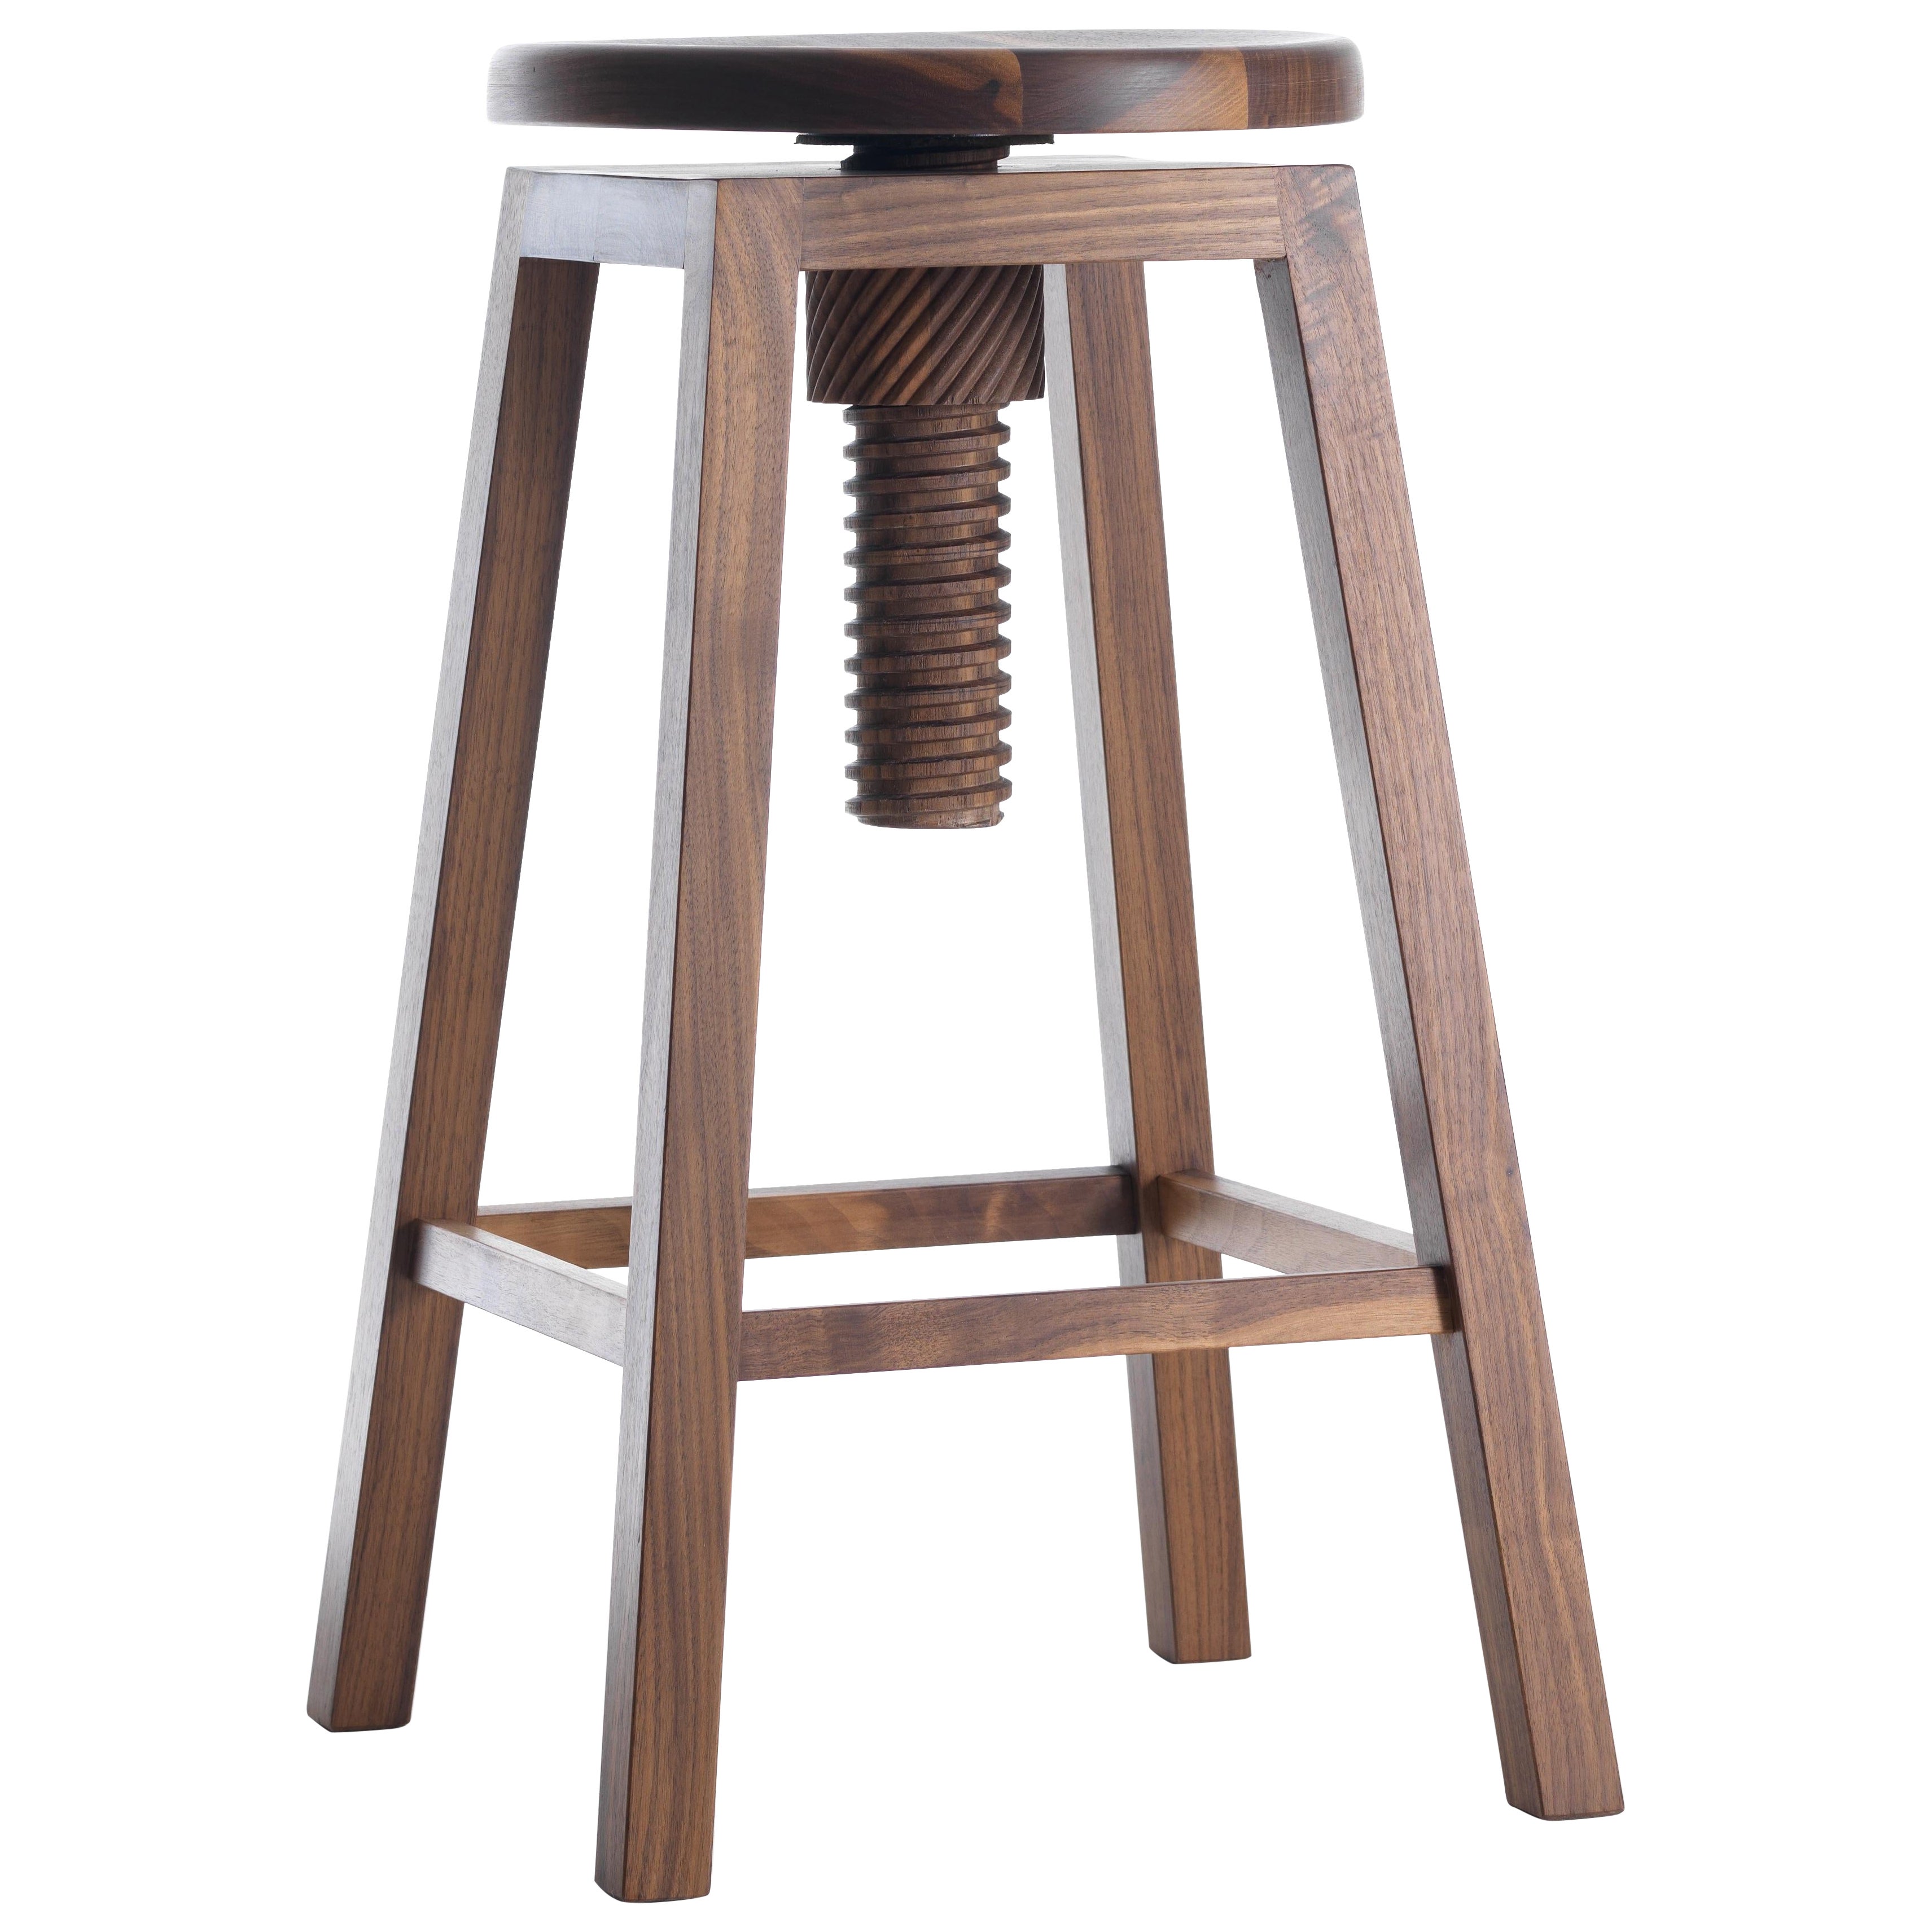 Invito Solid Wood Stool, Walnut in Hand-Made Natural Finish, Contemporary For Sale